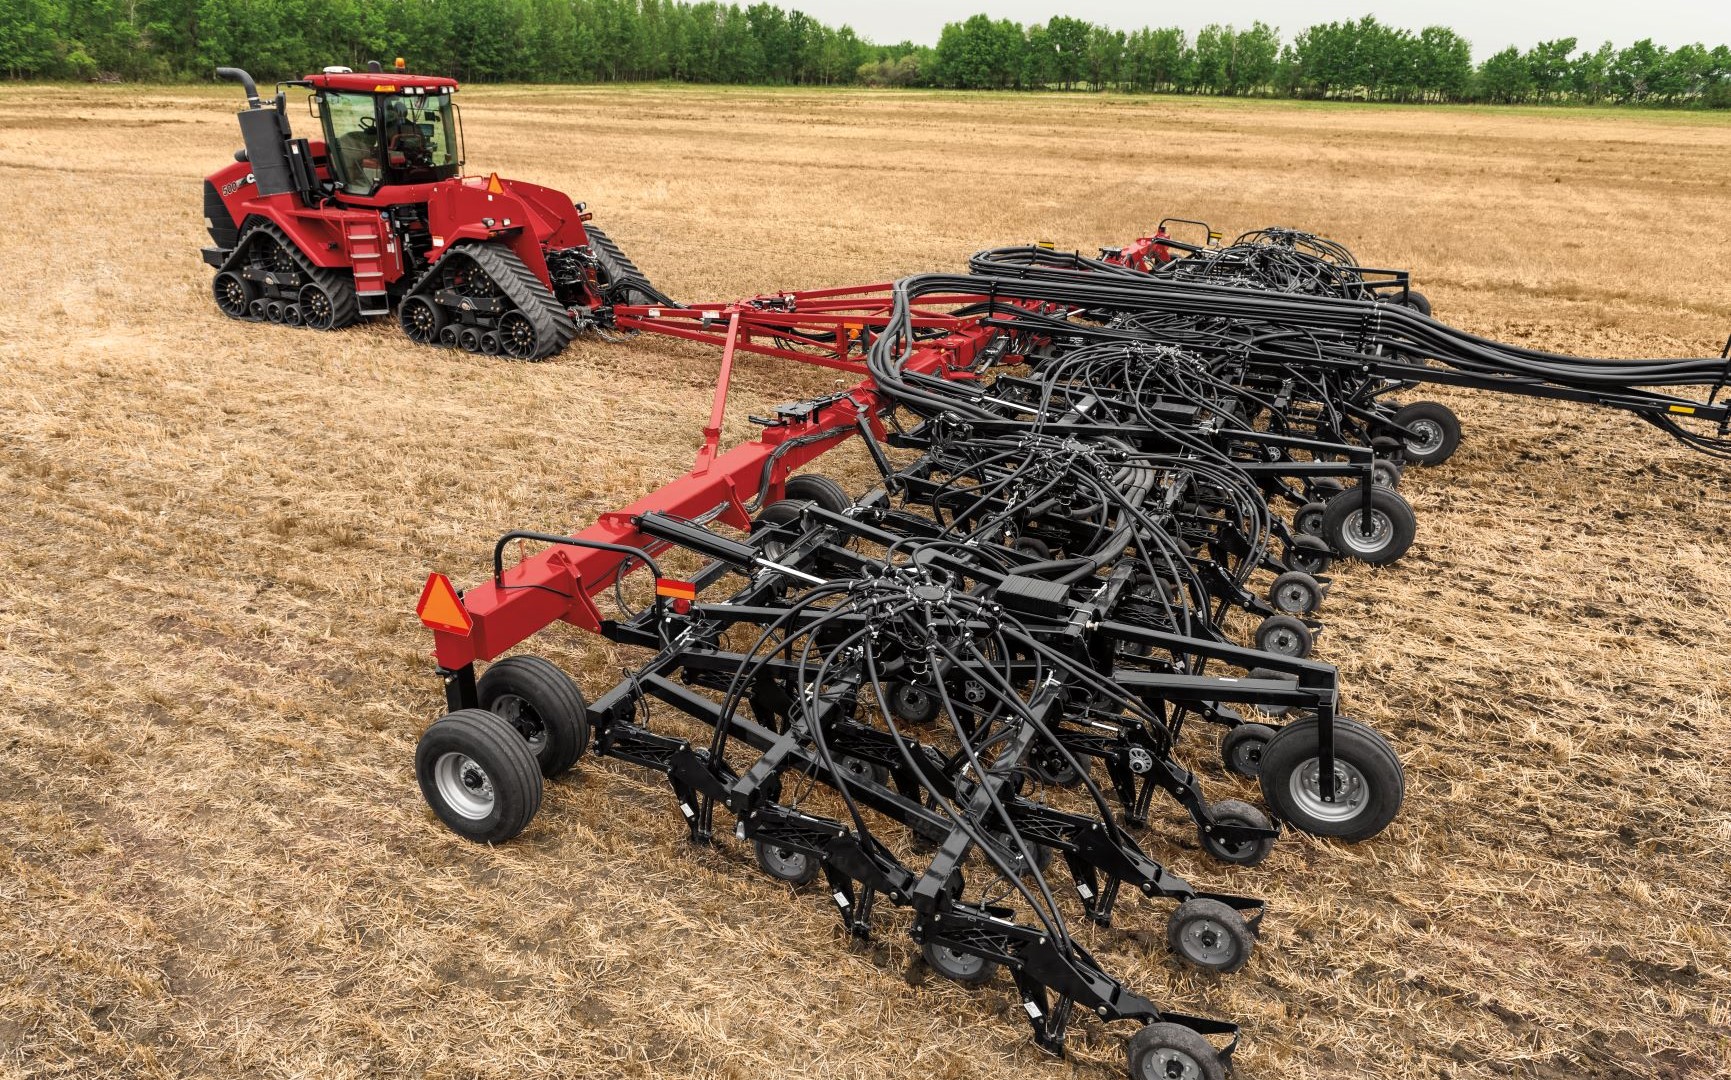 The Flex Hoe™ 900 air drill from Case IH is agronomically designed to help producers efficiently seed small grains.